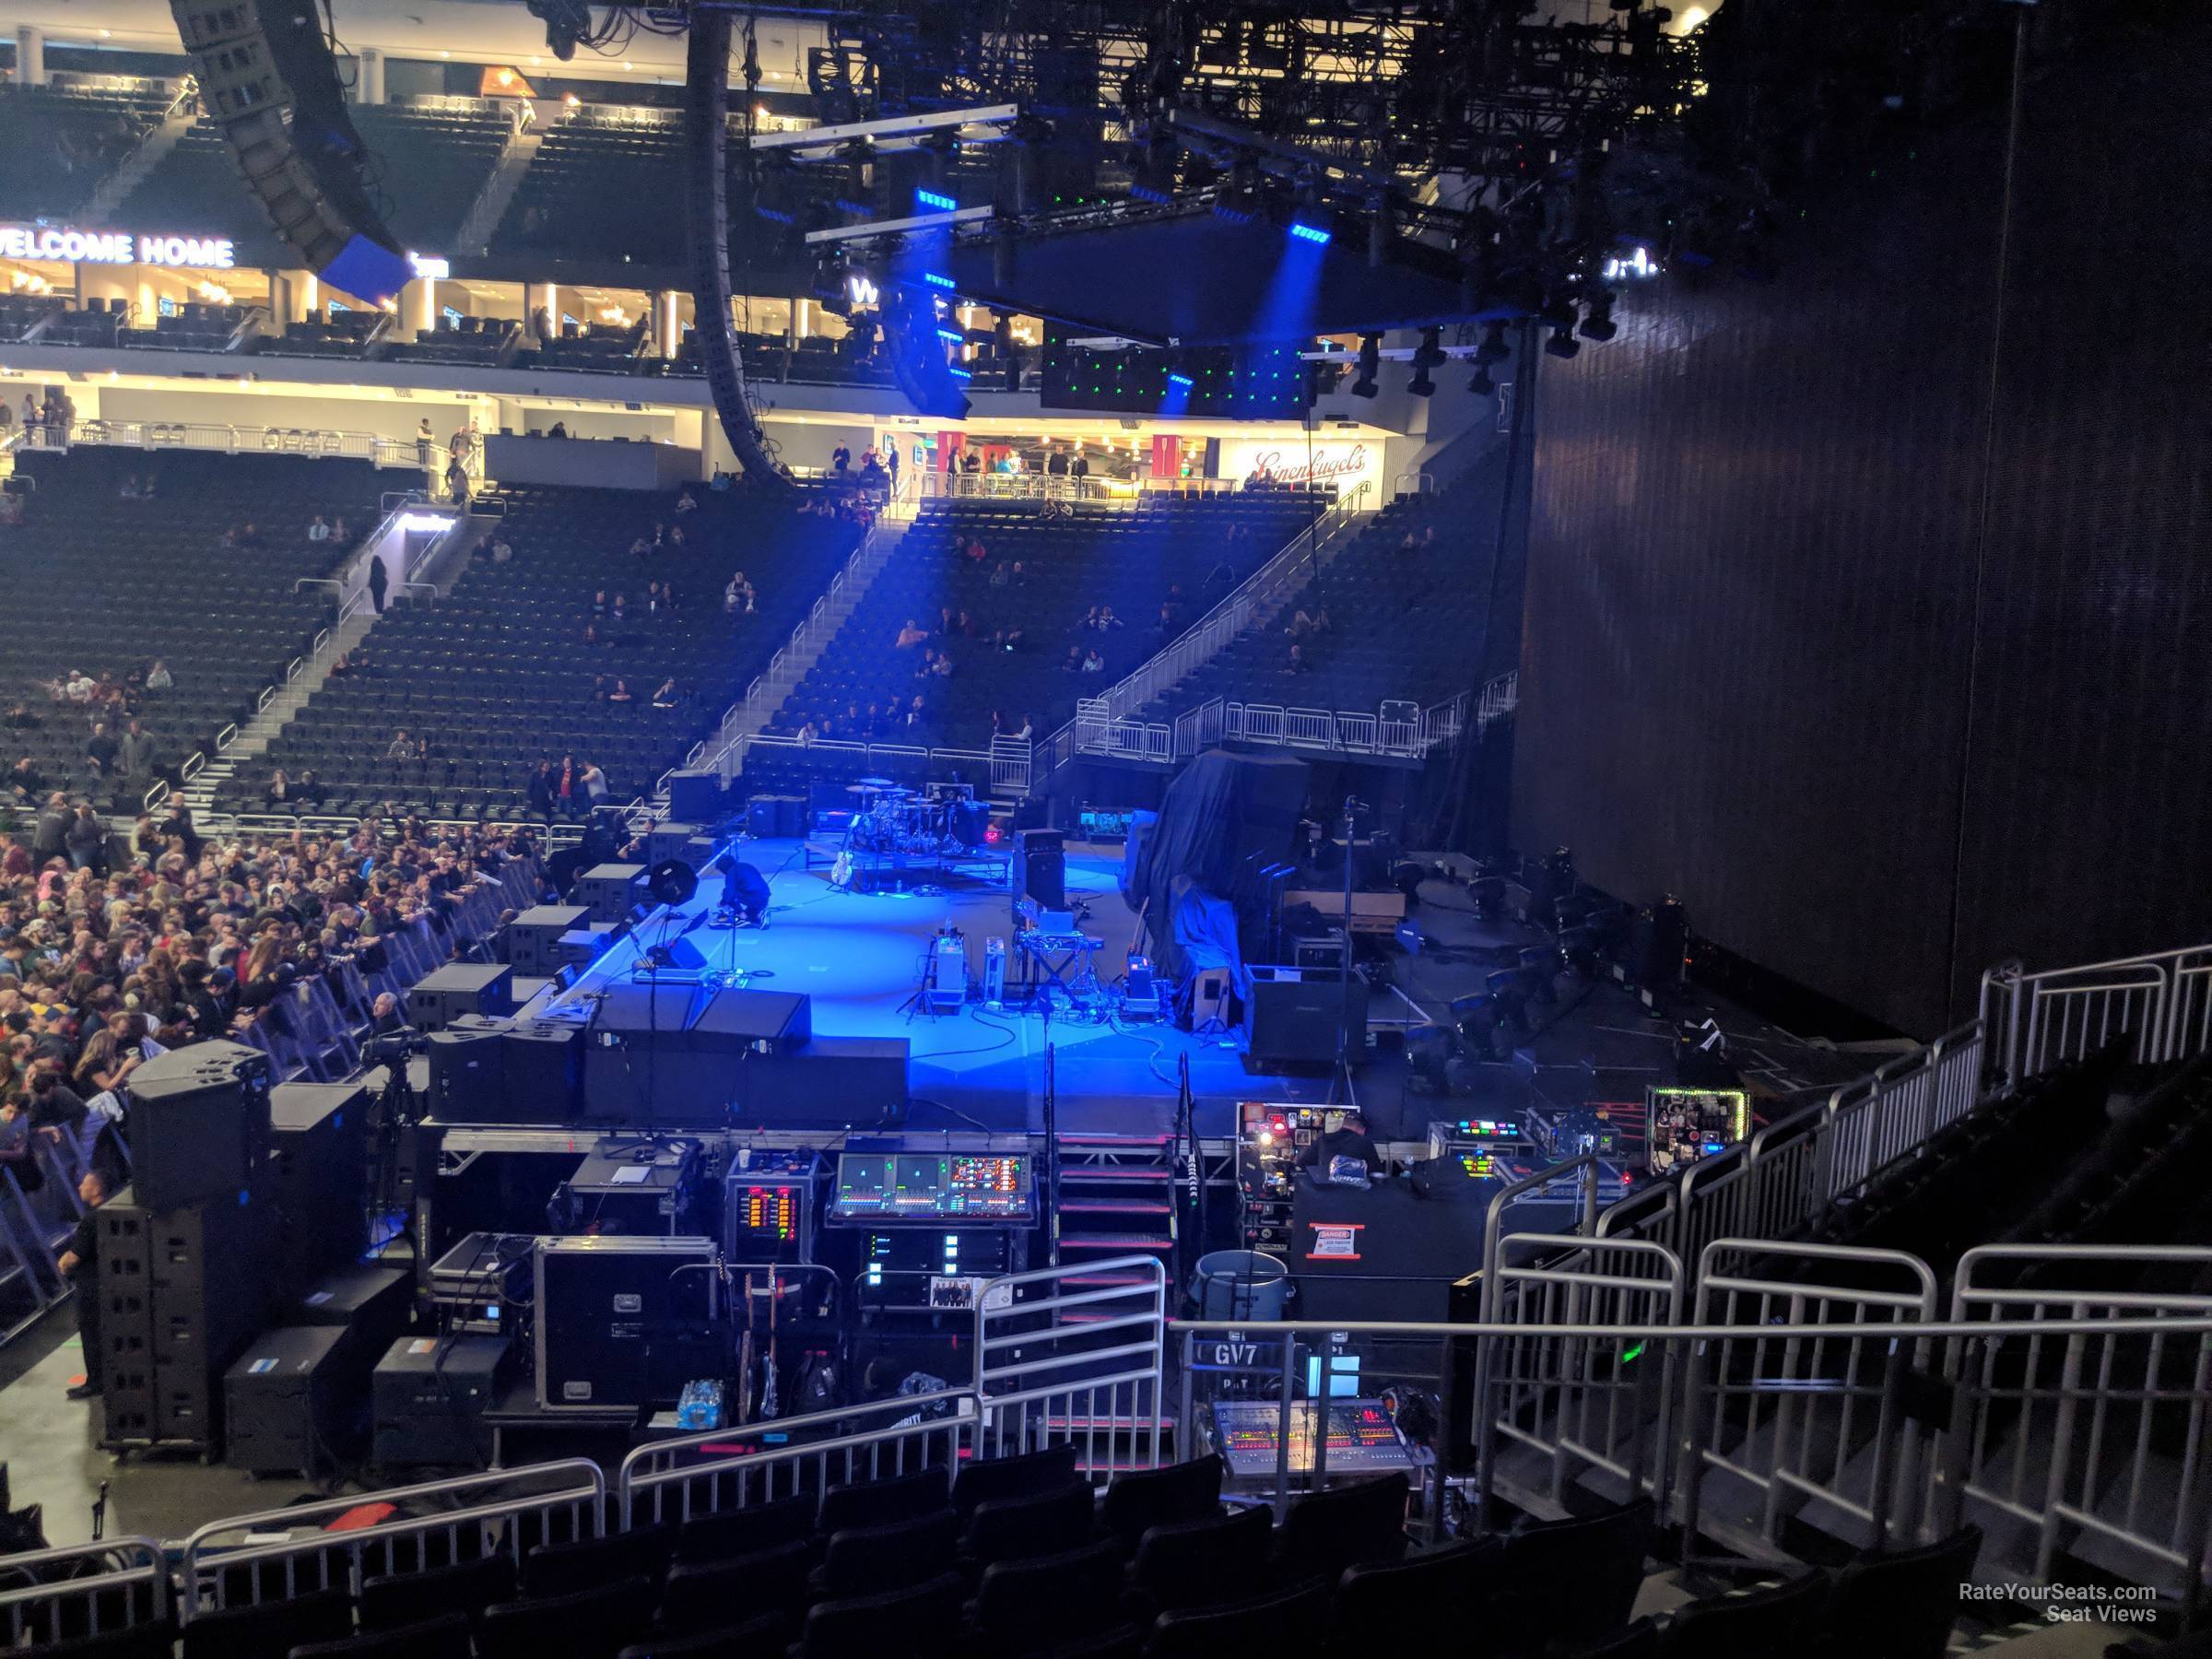 section 115, row 14 seat view  for concert - fiserv forum